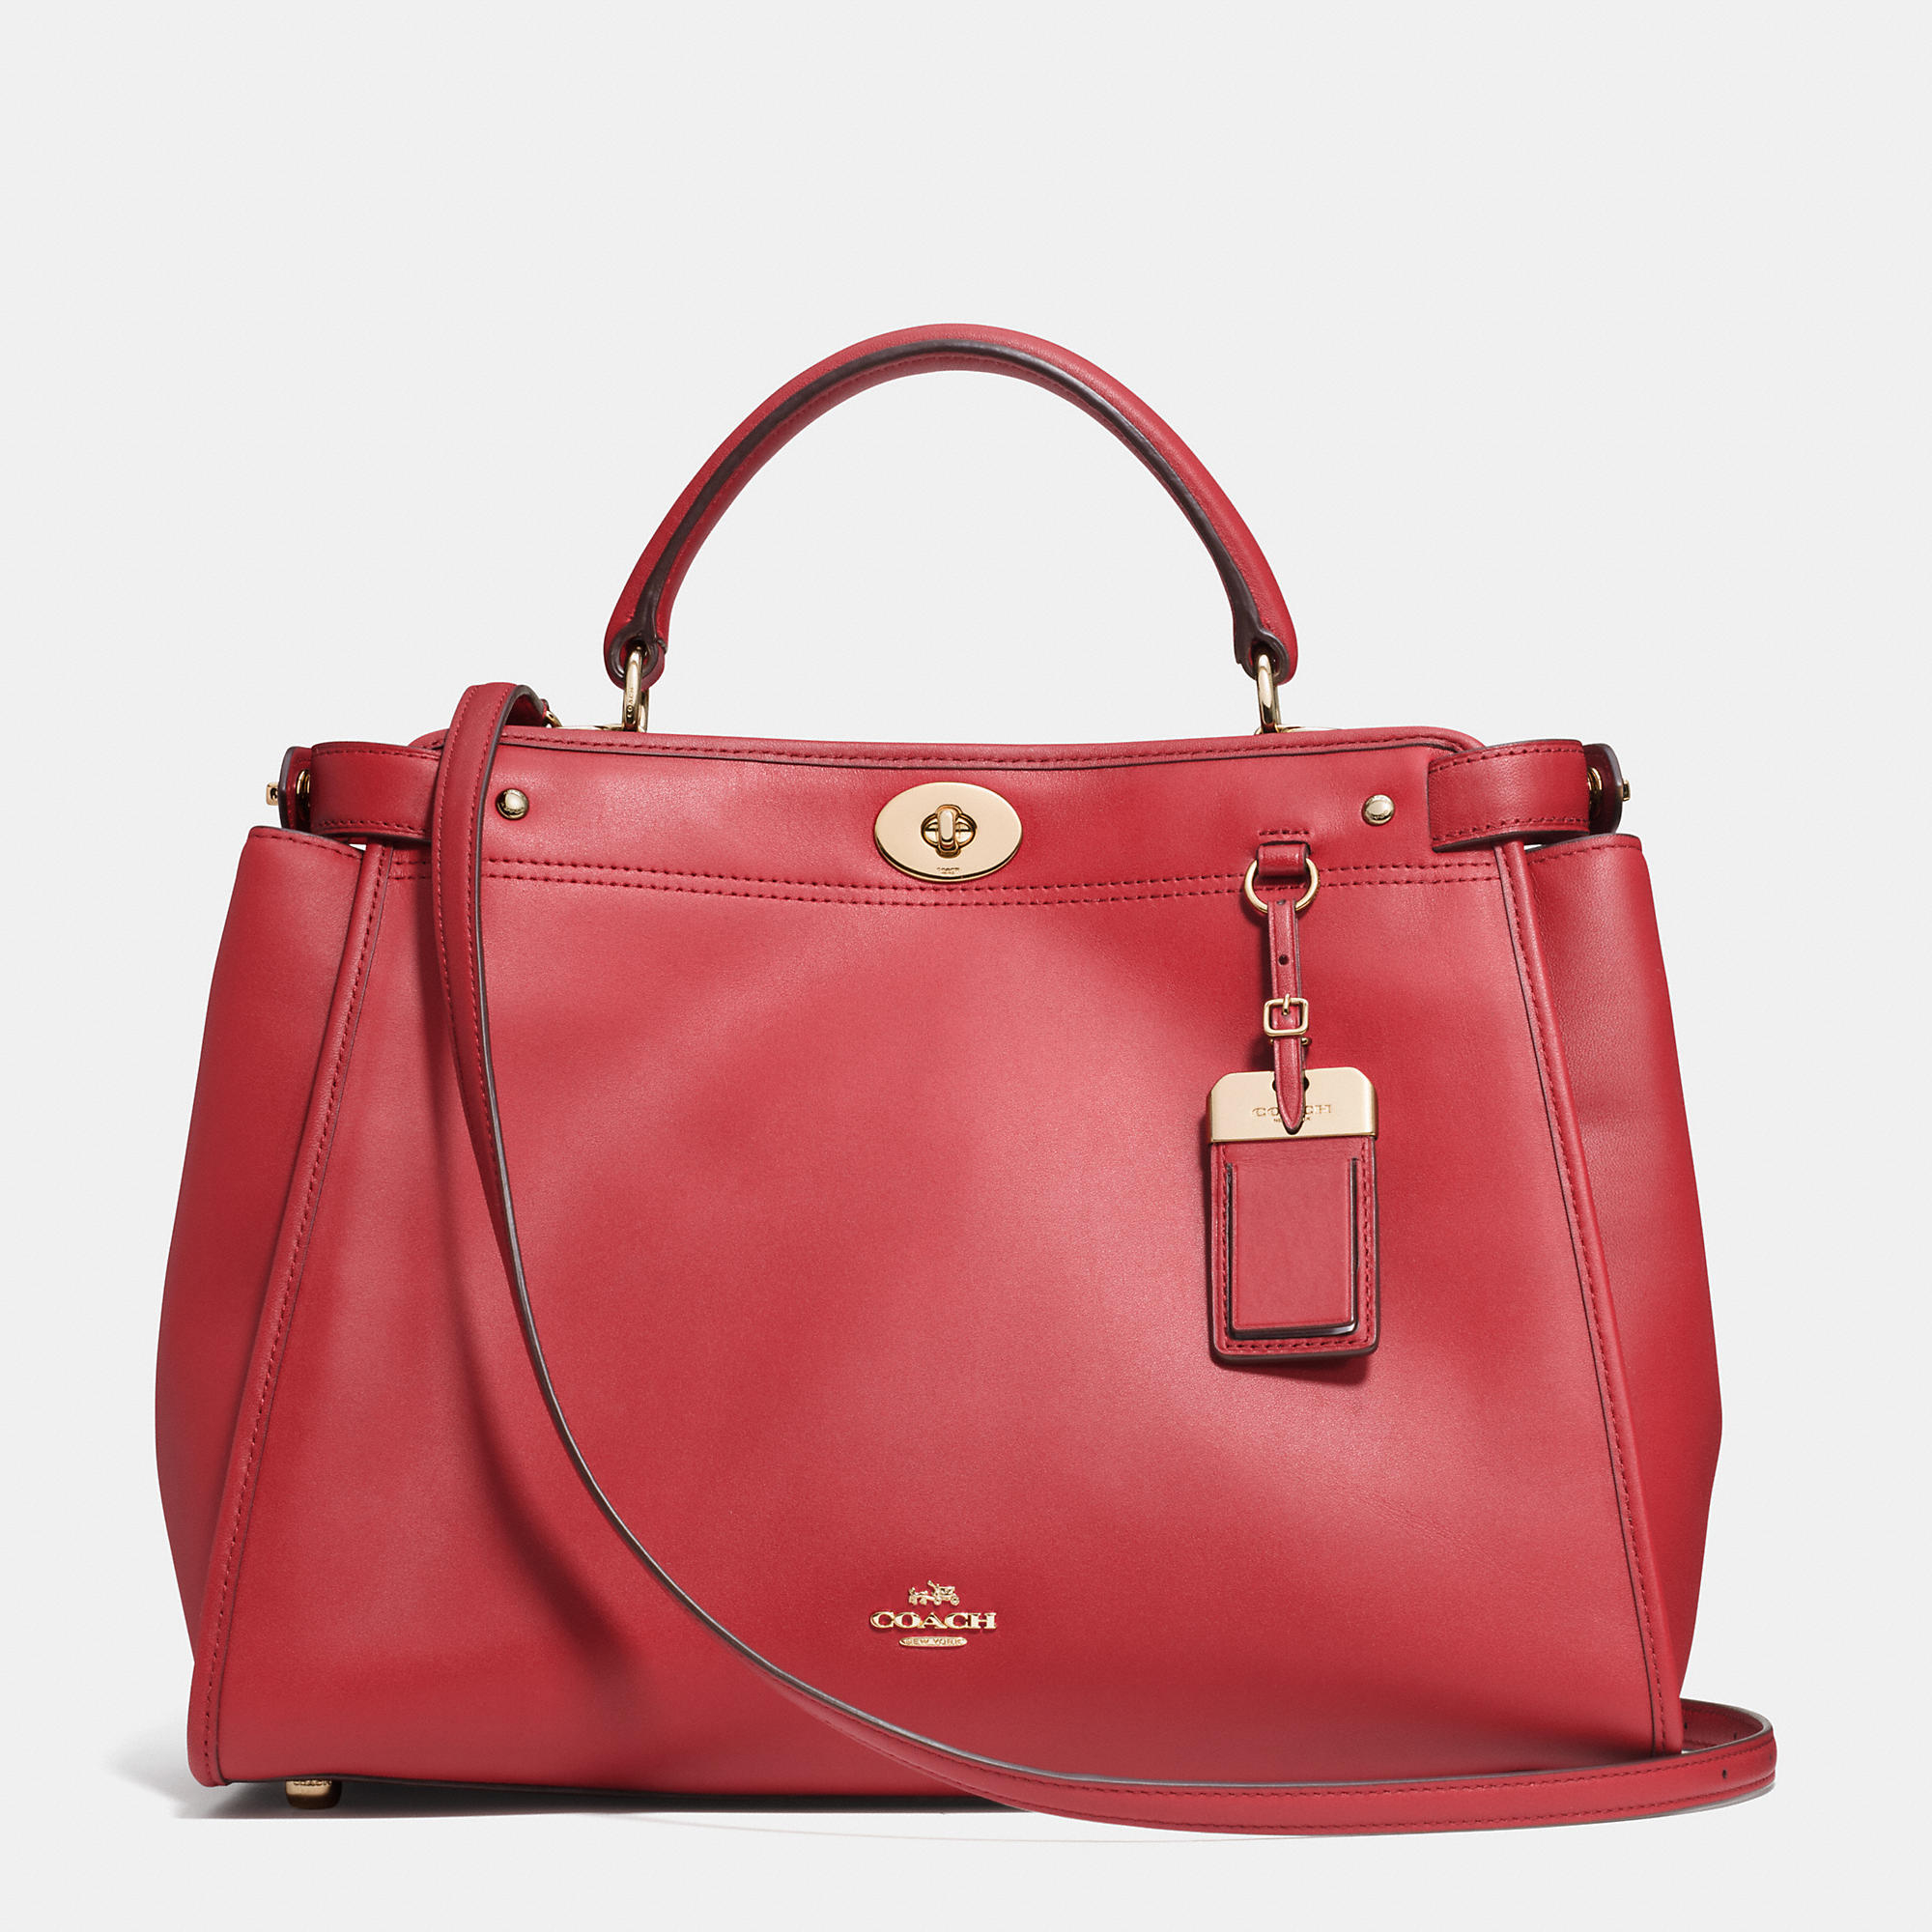 COACH Gramercy Satchel In Leather in Pink - Lyst